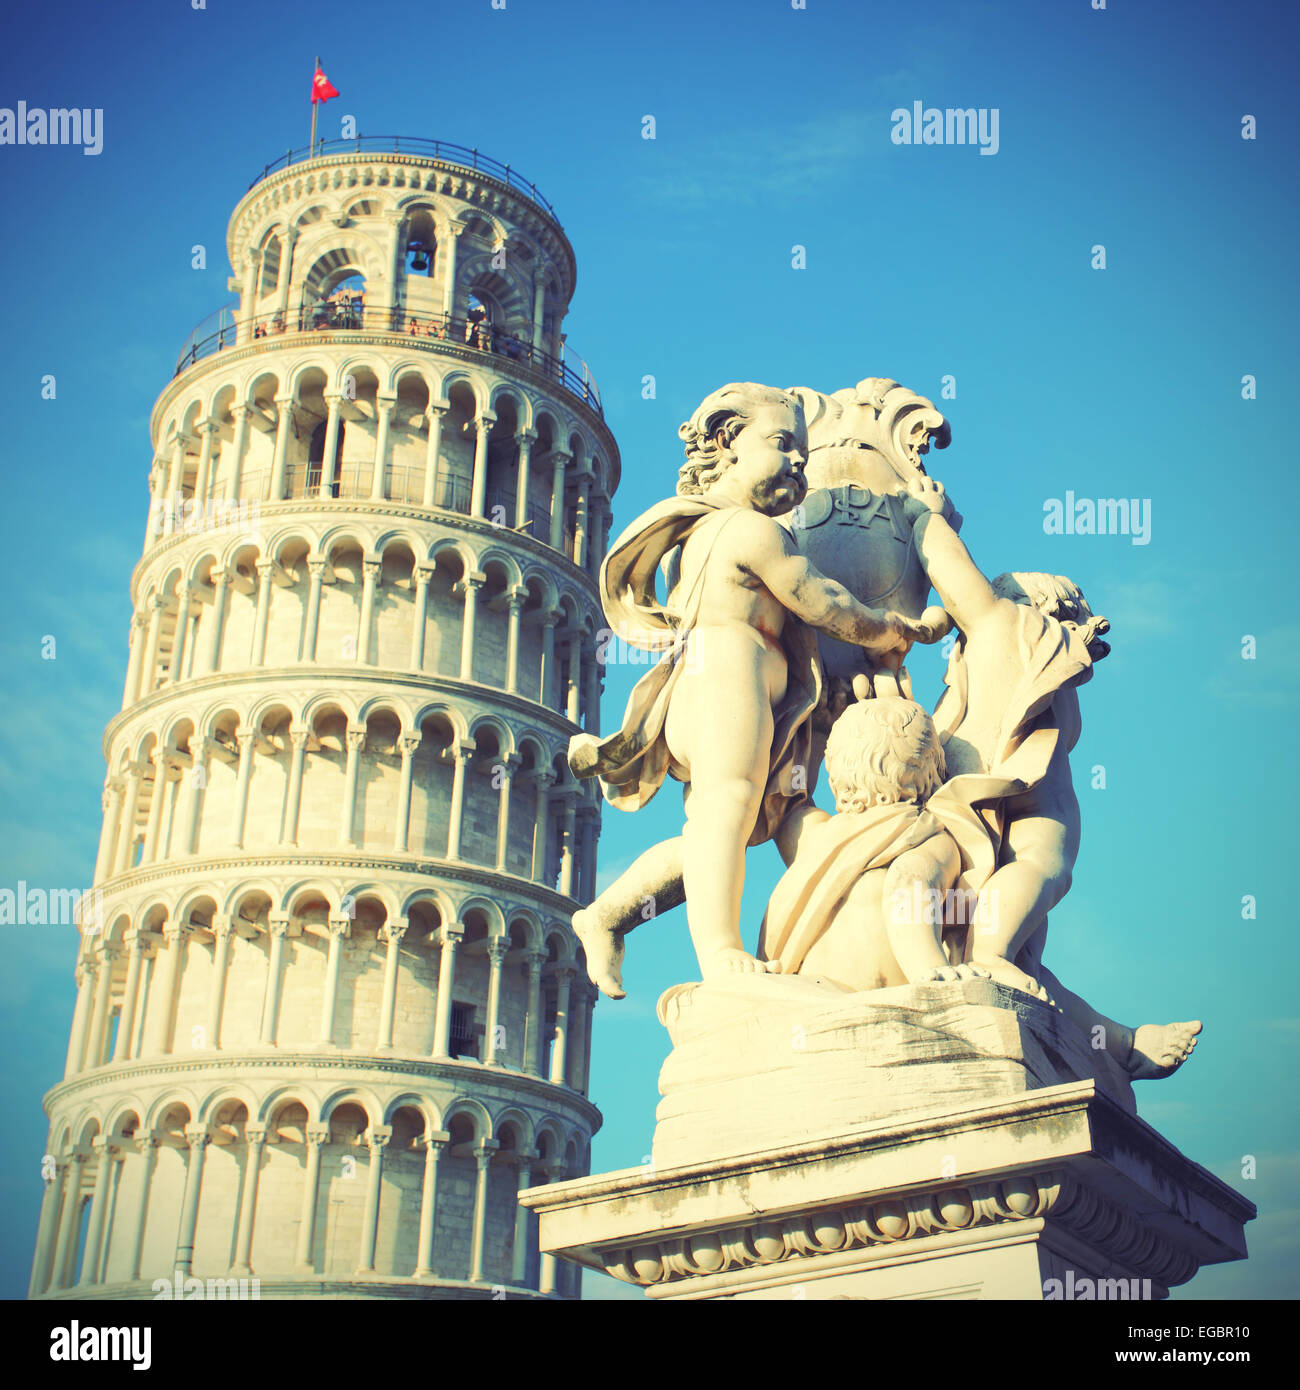 The Leaning Tower of Pisa and La Fontana dei Putti Statue, Italy. Toned image Stock Photo